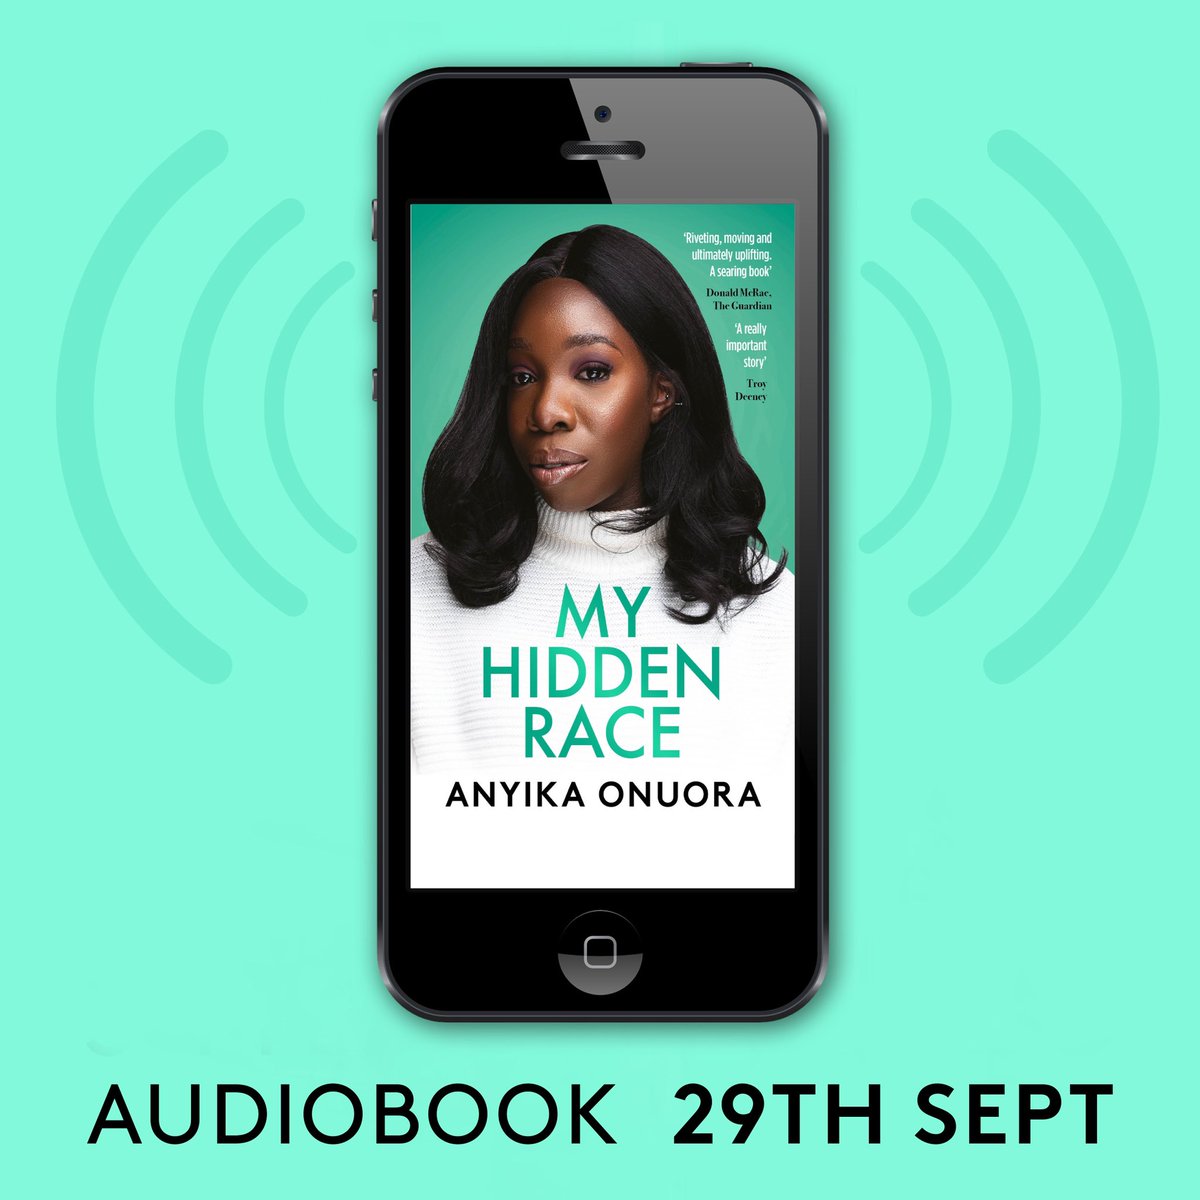 So excited to share that My Hidden Race will be available on audiobook on 29th September! Narrating my book is something I’ve always wanted to do and I hope you all enjoy listening to my soothing voice as much as I loved recording it ☺️ ❗️PRE-ORDER LINK COMING SOON ❗️